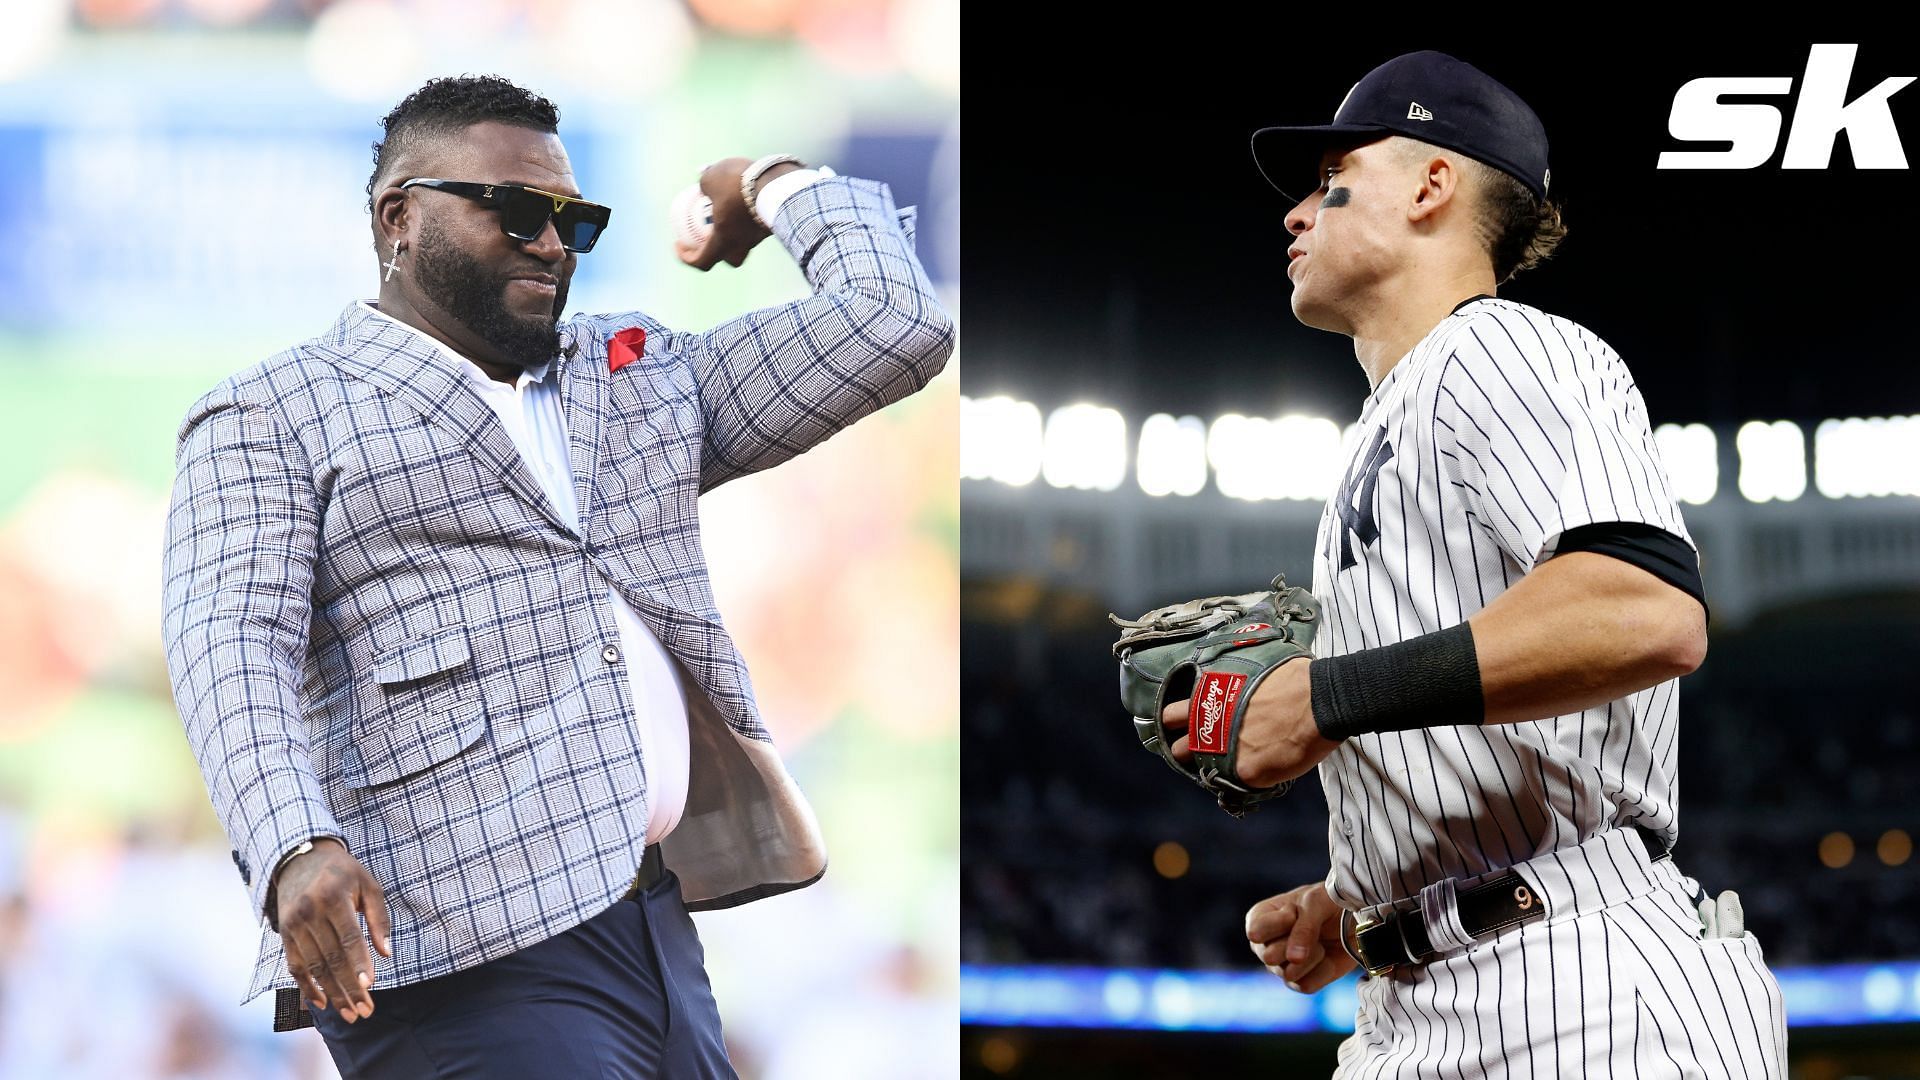 David Ortiz: Aaron Judge would be perfect for the Mets. I would